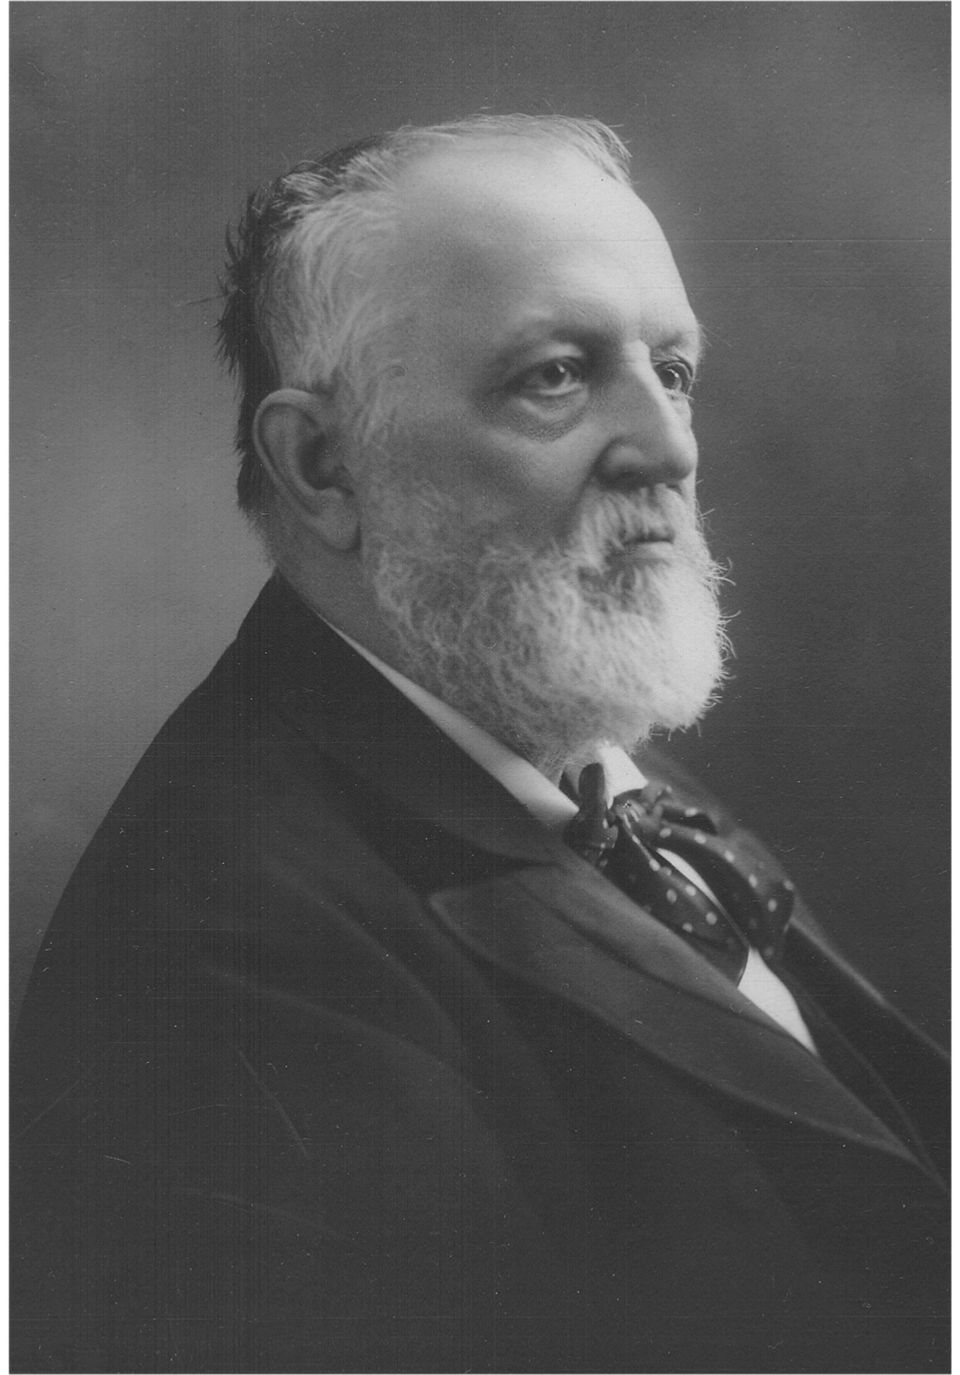 Samuel green 1906  president of the groton historical society (aka groton history center) from 1894 to 1917. (photo courtesy of the ghc archives.)